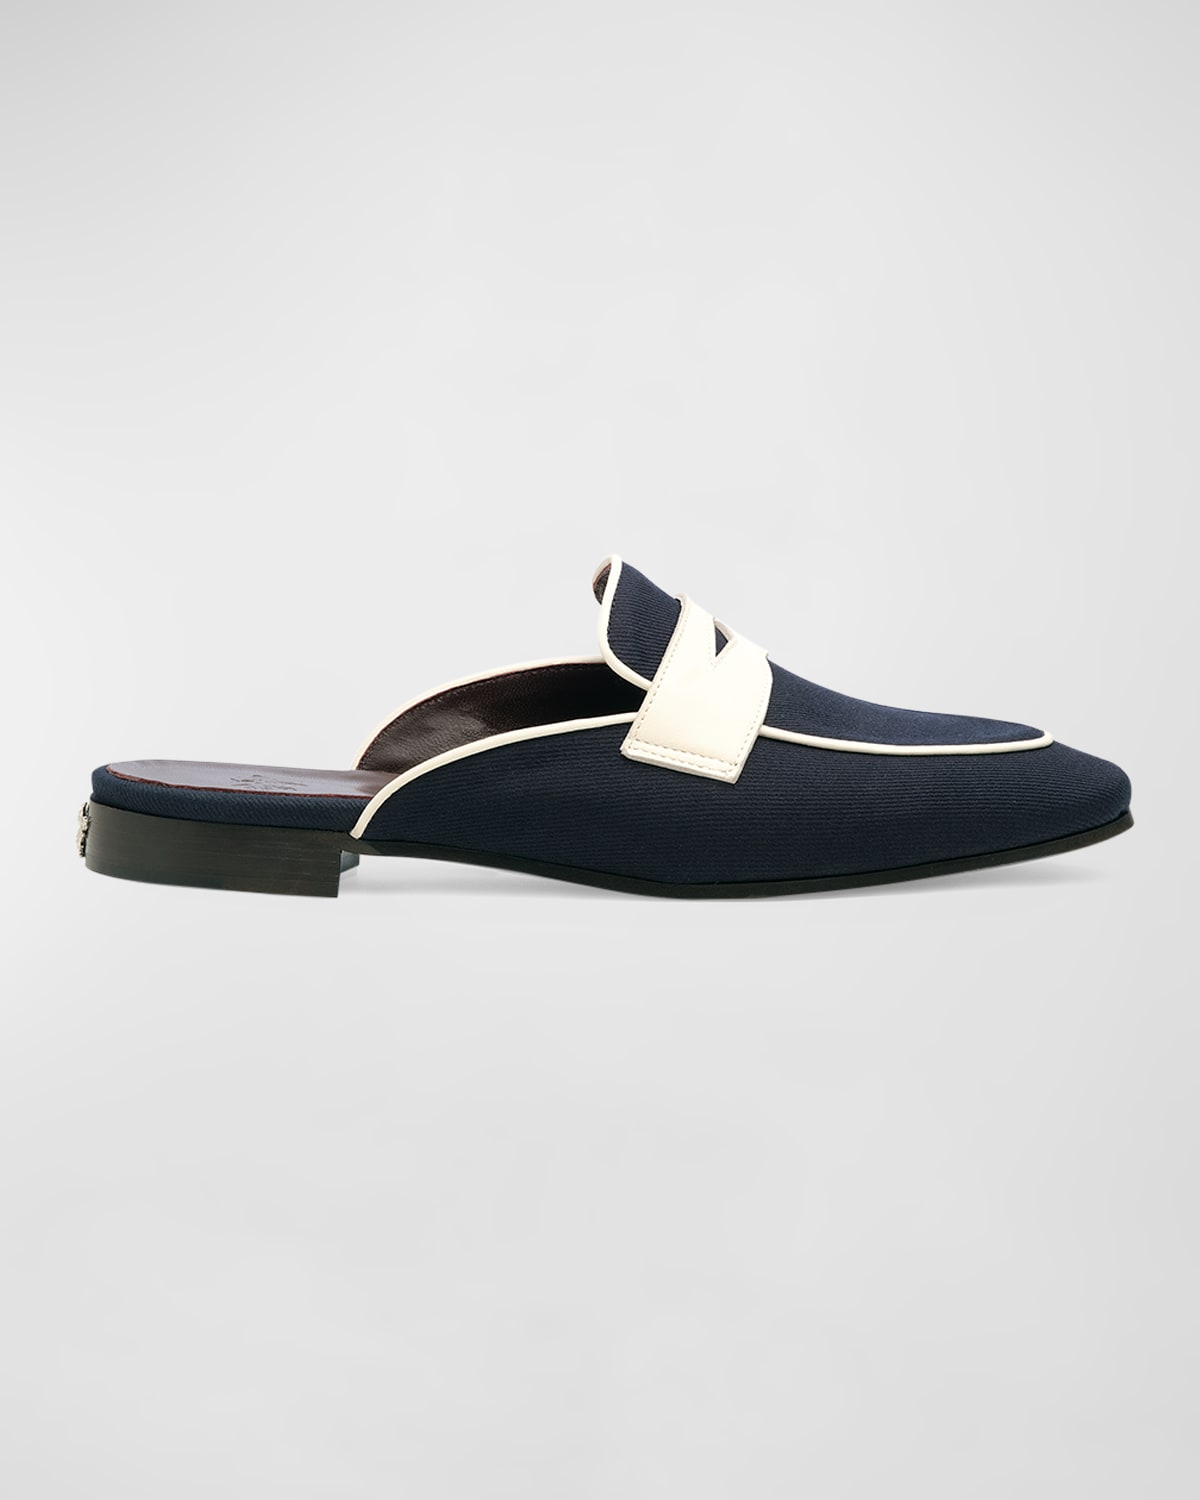 Bicolor Penny Loafer Mules